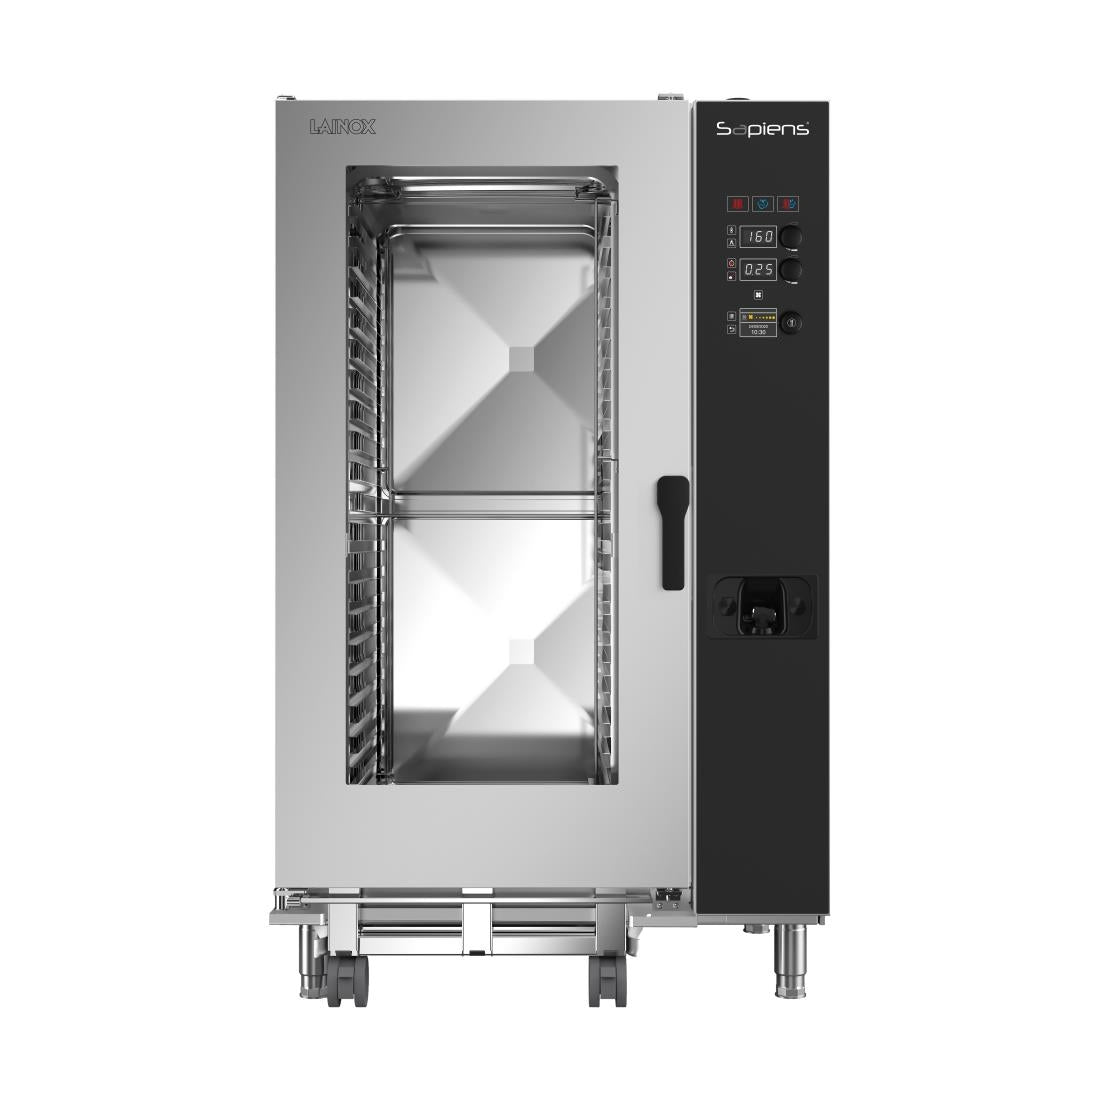 HP595 Lainox Sapiens Boosted Gas Touch Screen Combi Oven SAG202BV 20X2/1GN JD Catering Equipment Solutions Ltd